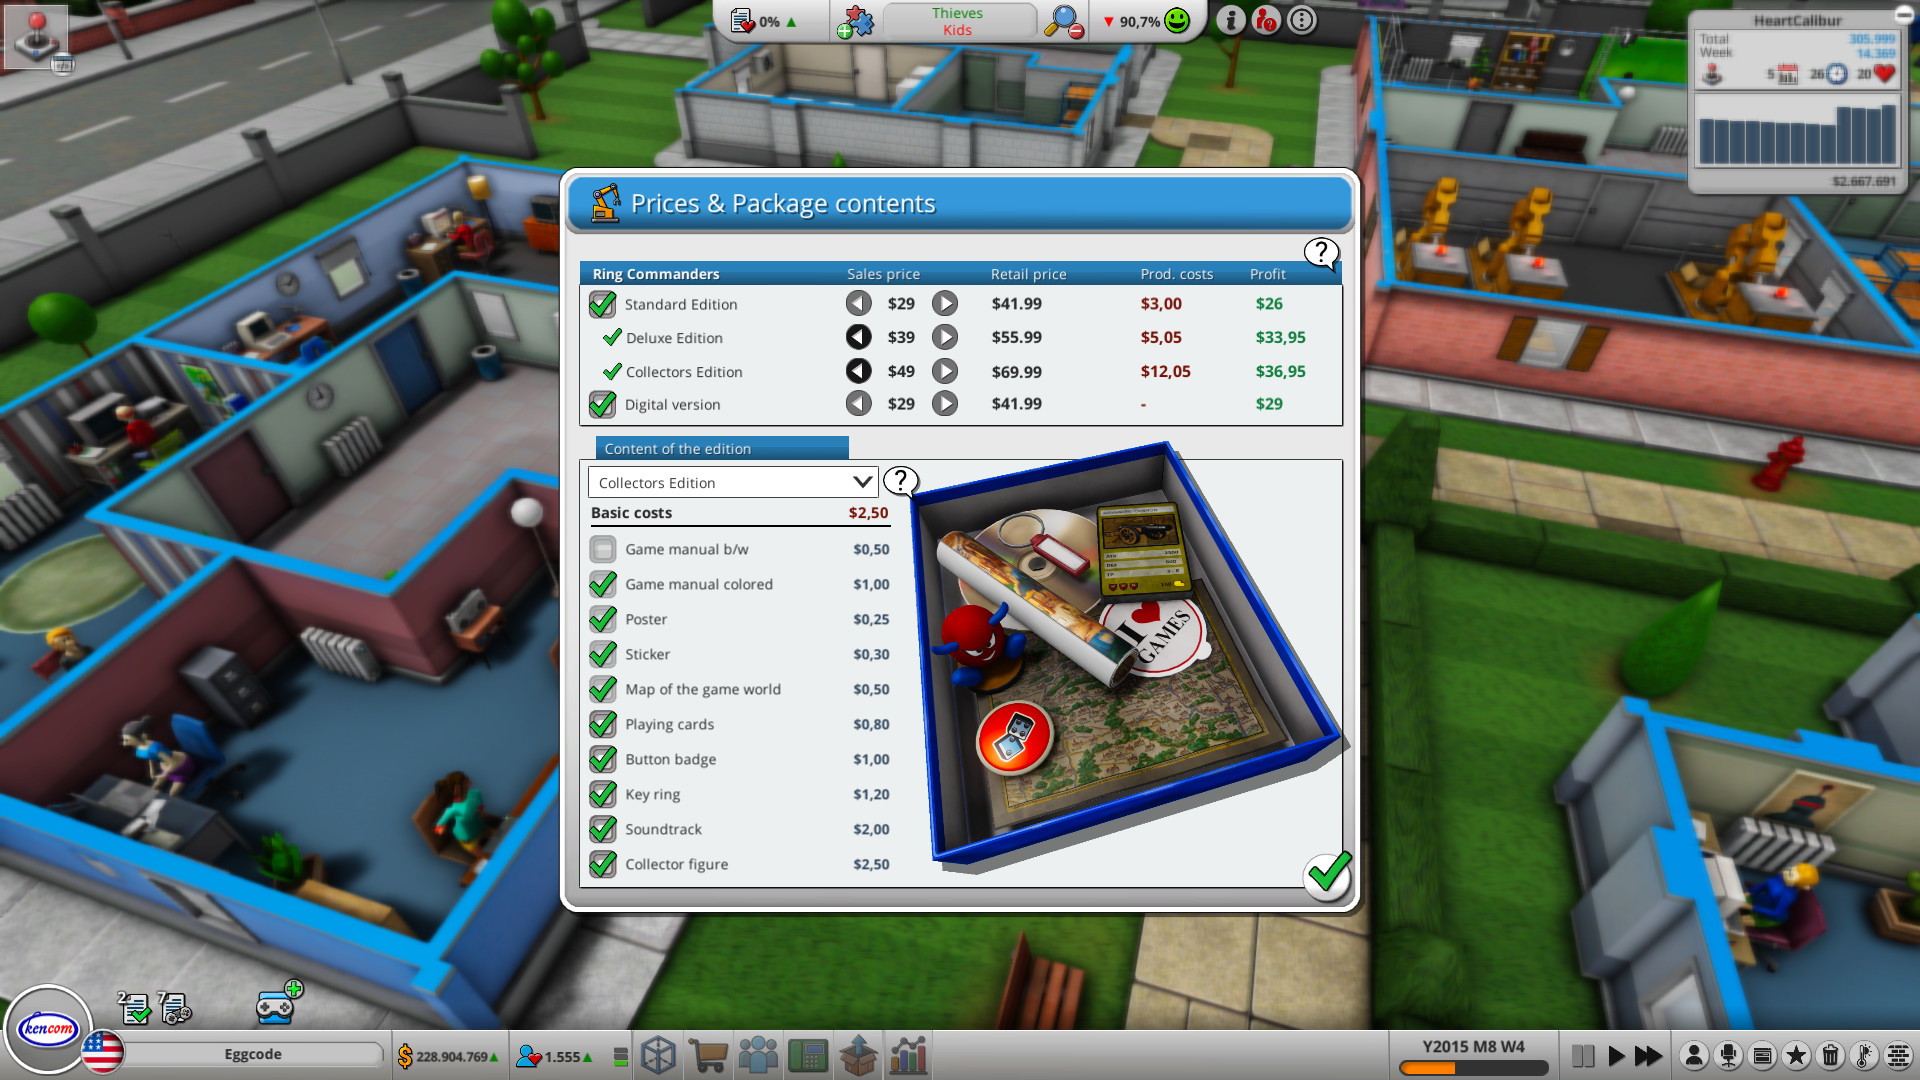 Pc tycoon 2 1.2. Mad Dev Tycoon. Tycoon 2 игра. Mad games Tycoon. Game Dev Tycoon 2.